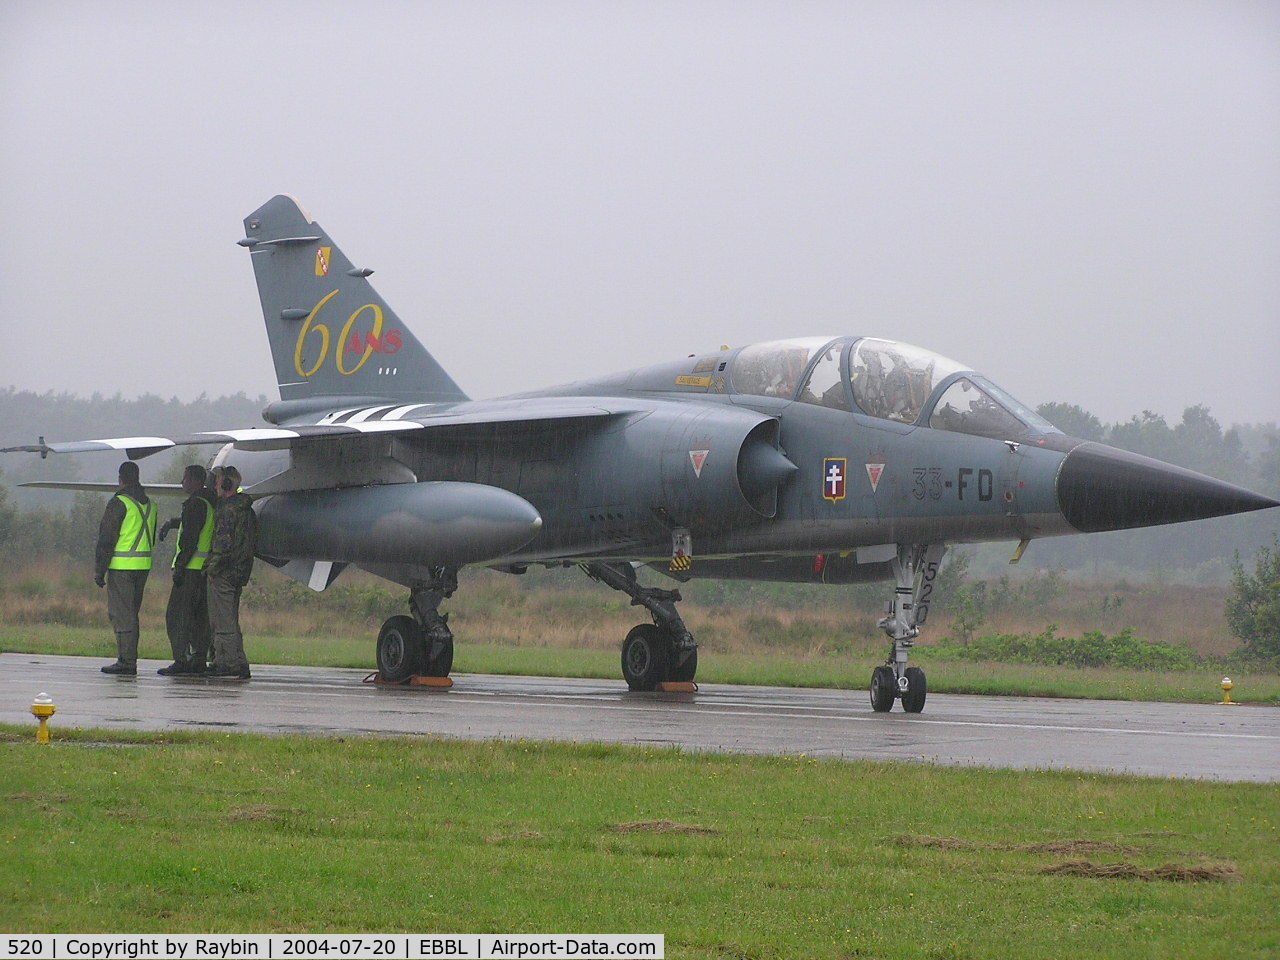 520, Dassault Mirage F.1B C/N Not found 520, Celebrating 60 years D-day with D-day stripes